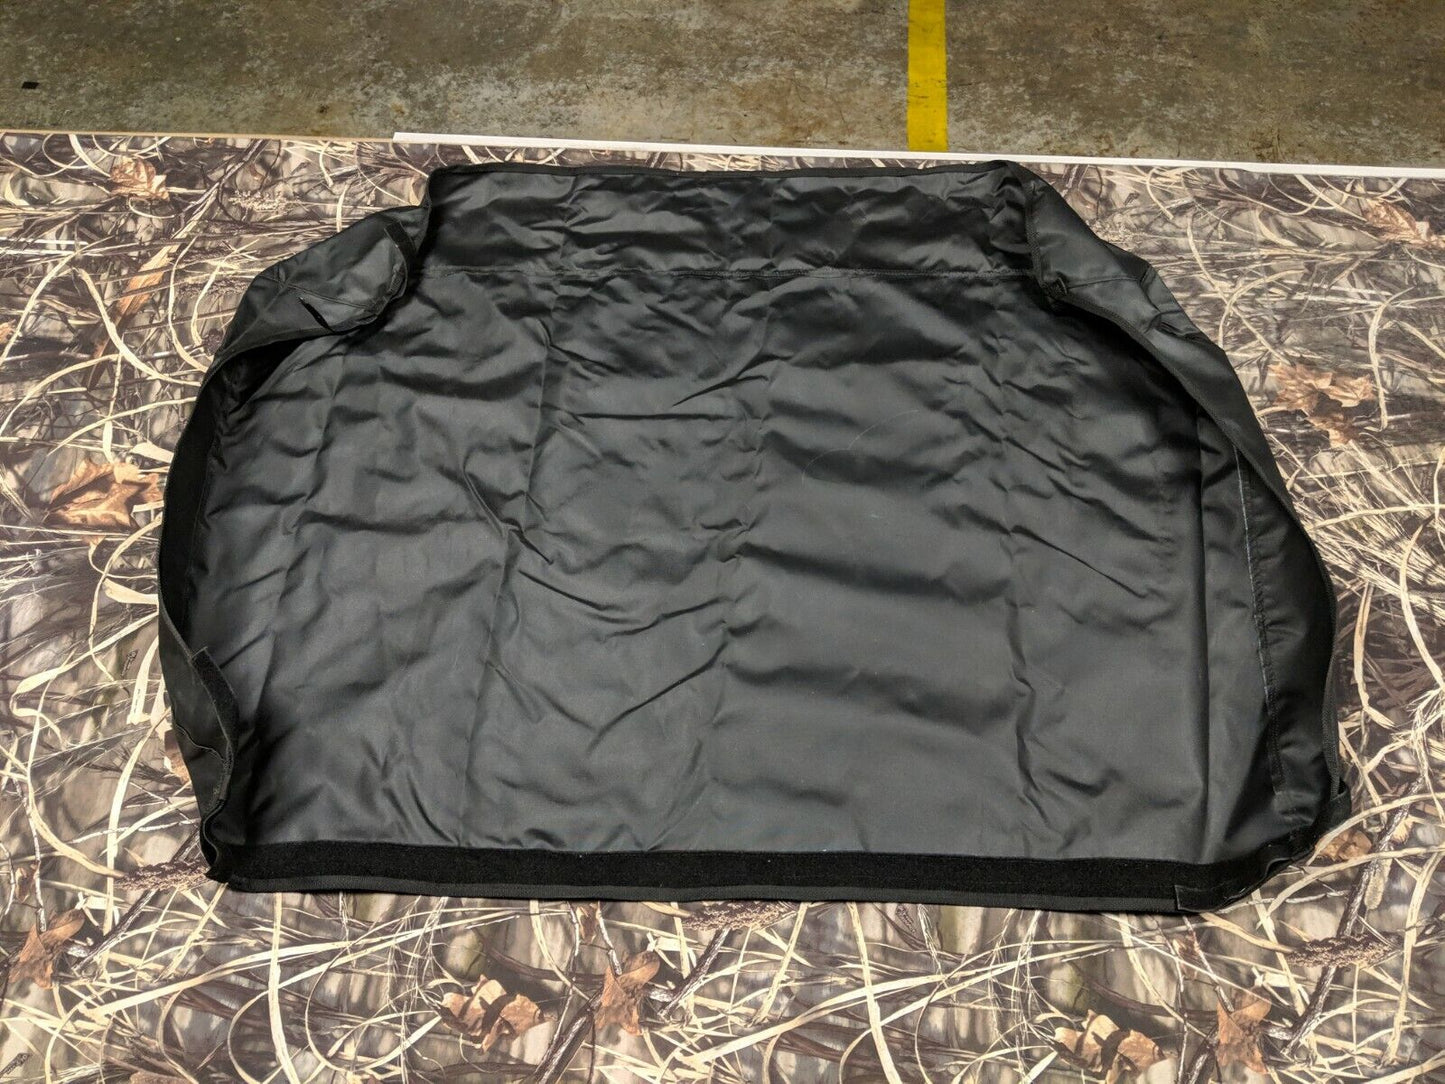 VINYL WINDSHIELD and ROOF Combo for Polaris Ranger 400 - Travels Highway Speed